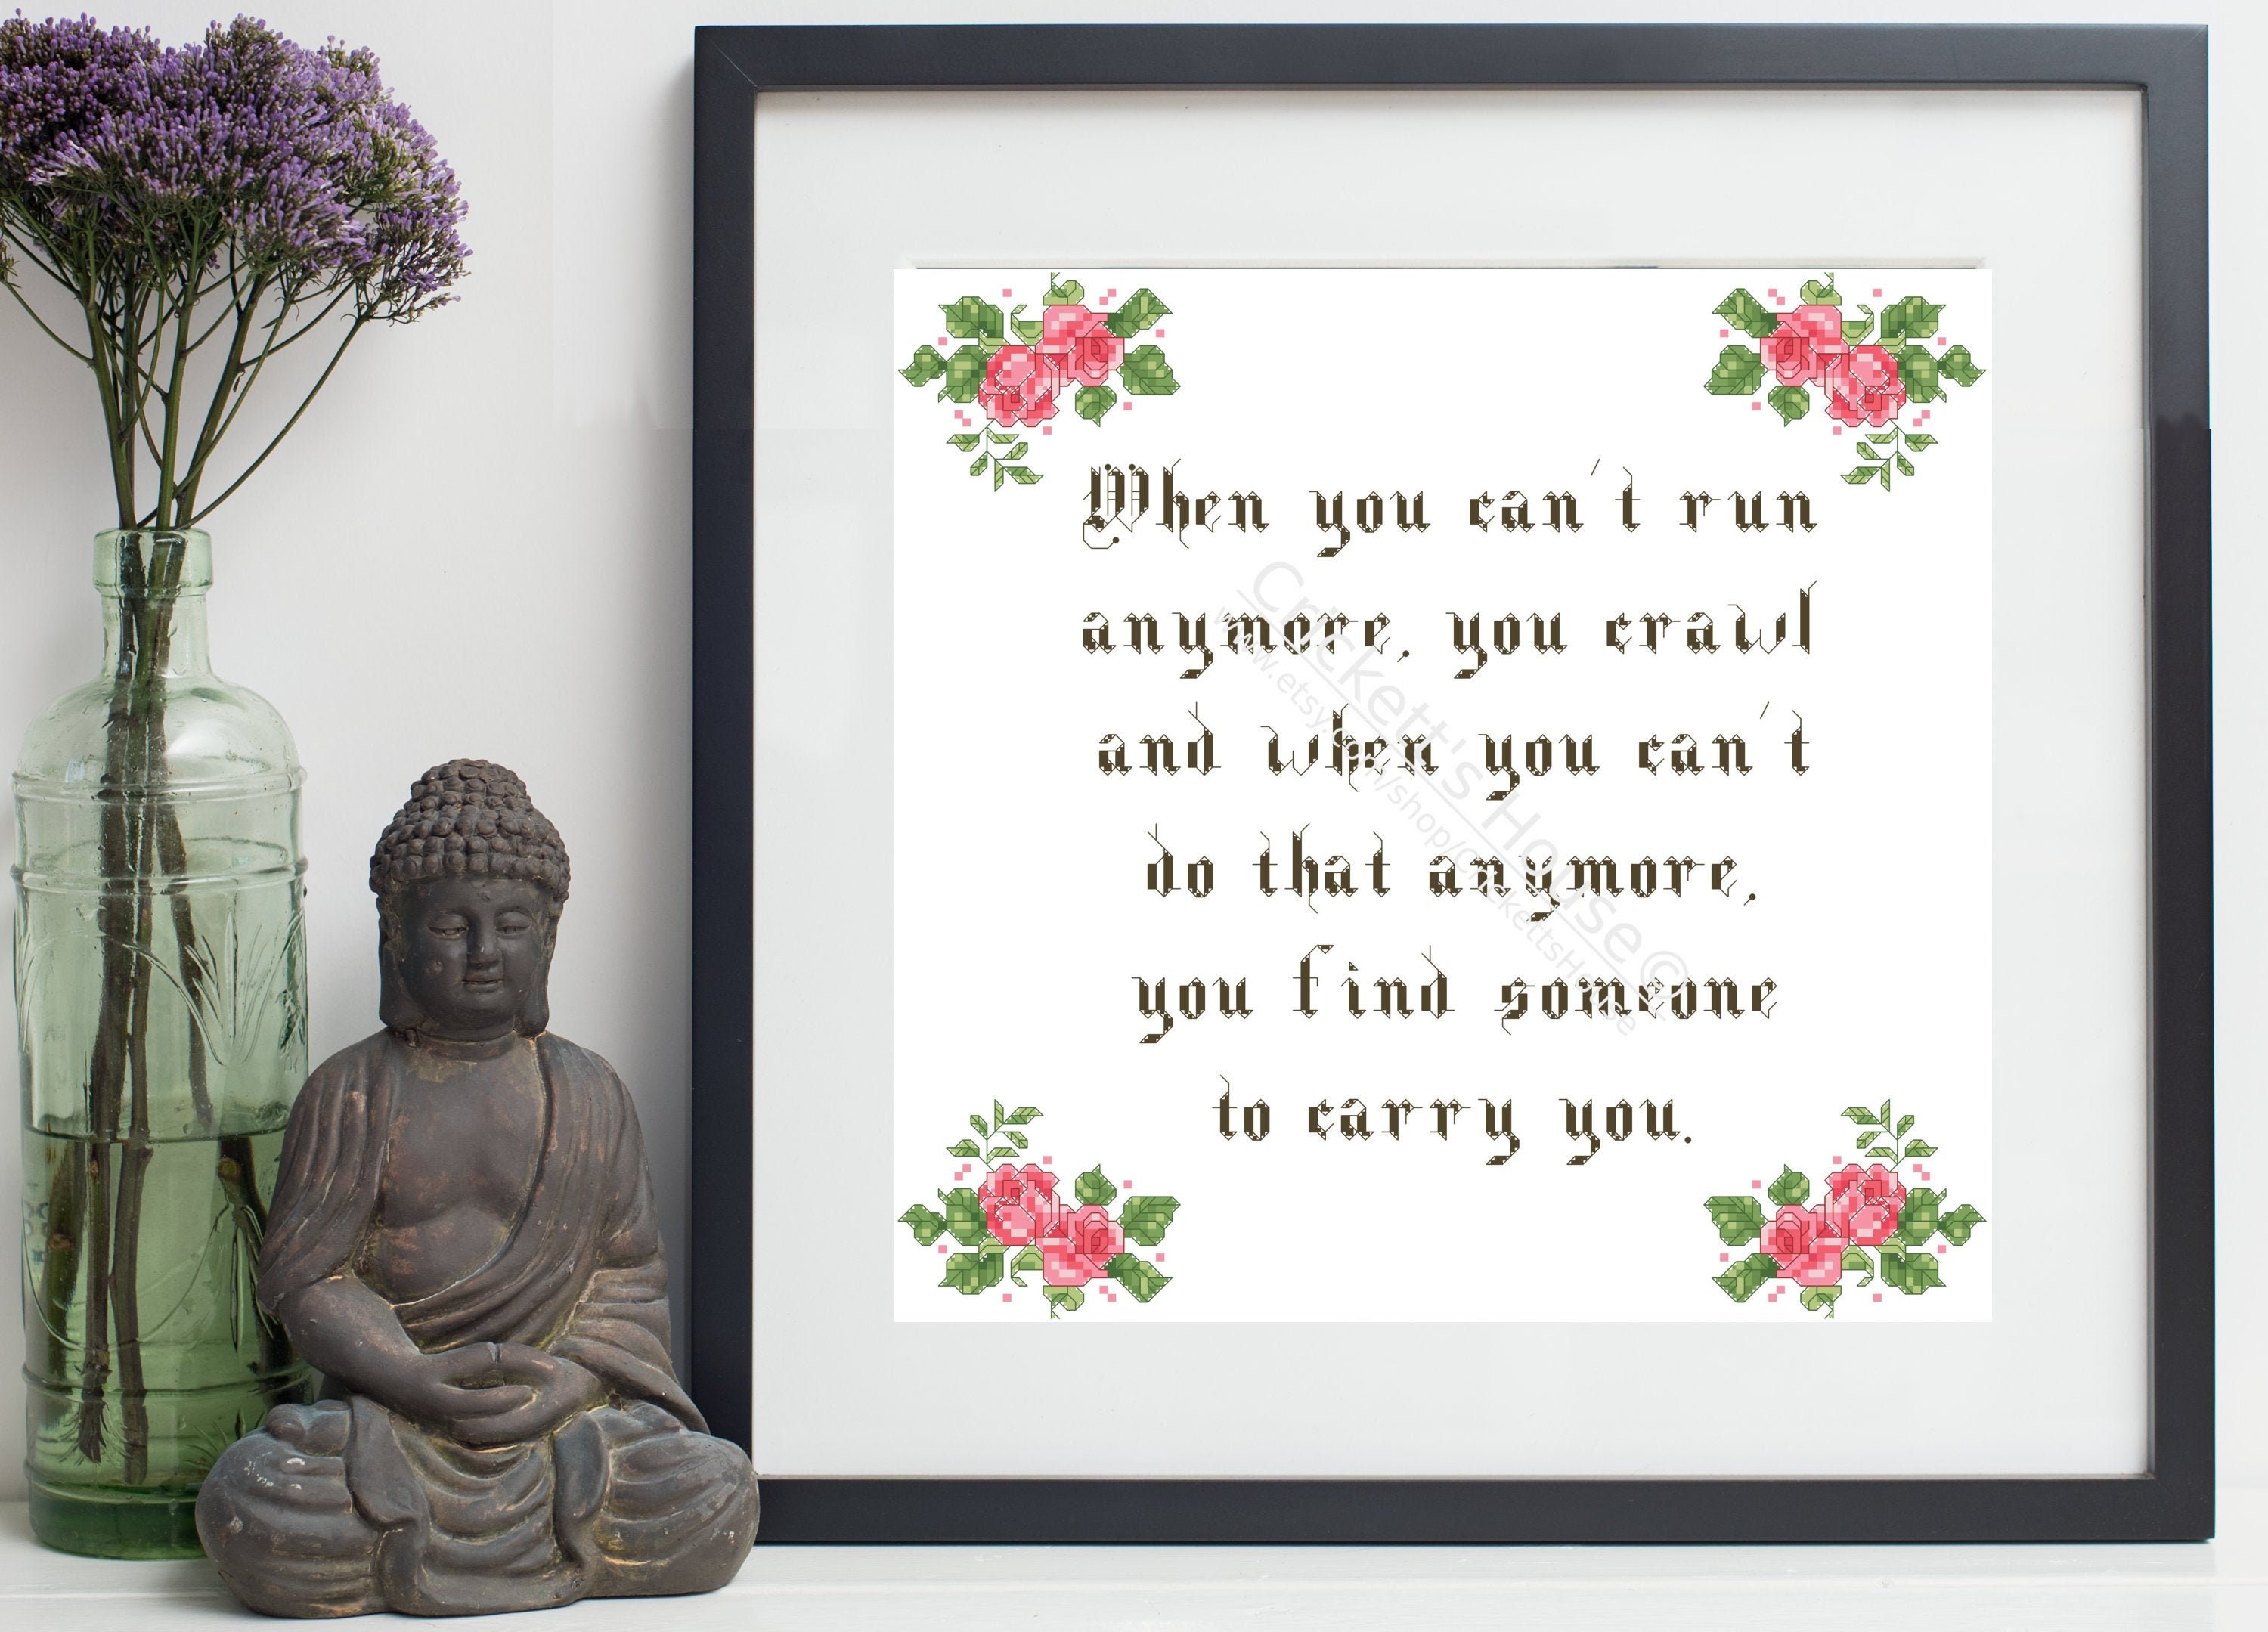 When You Can't Run Cross Stitch Pattern Quotes | Etsy